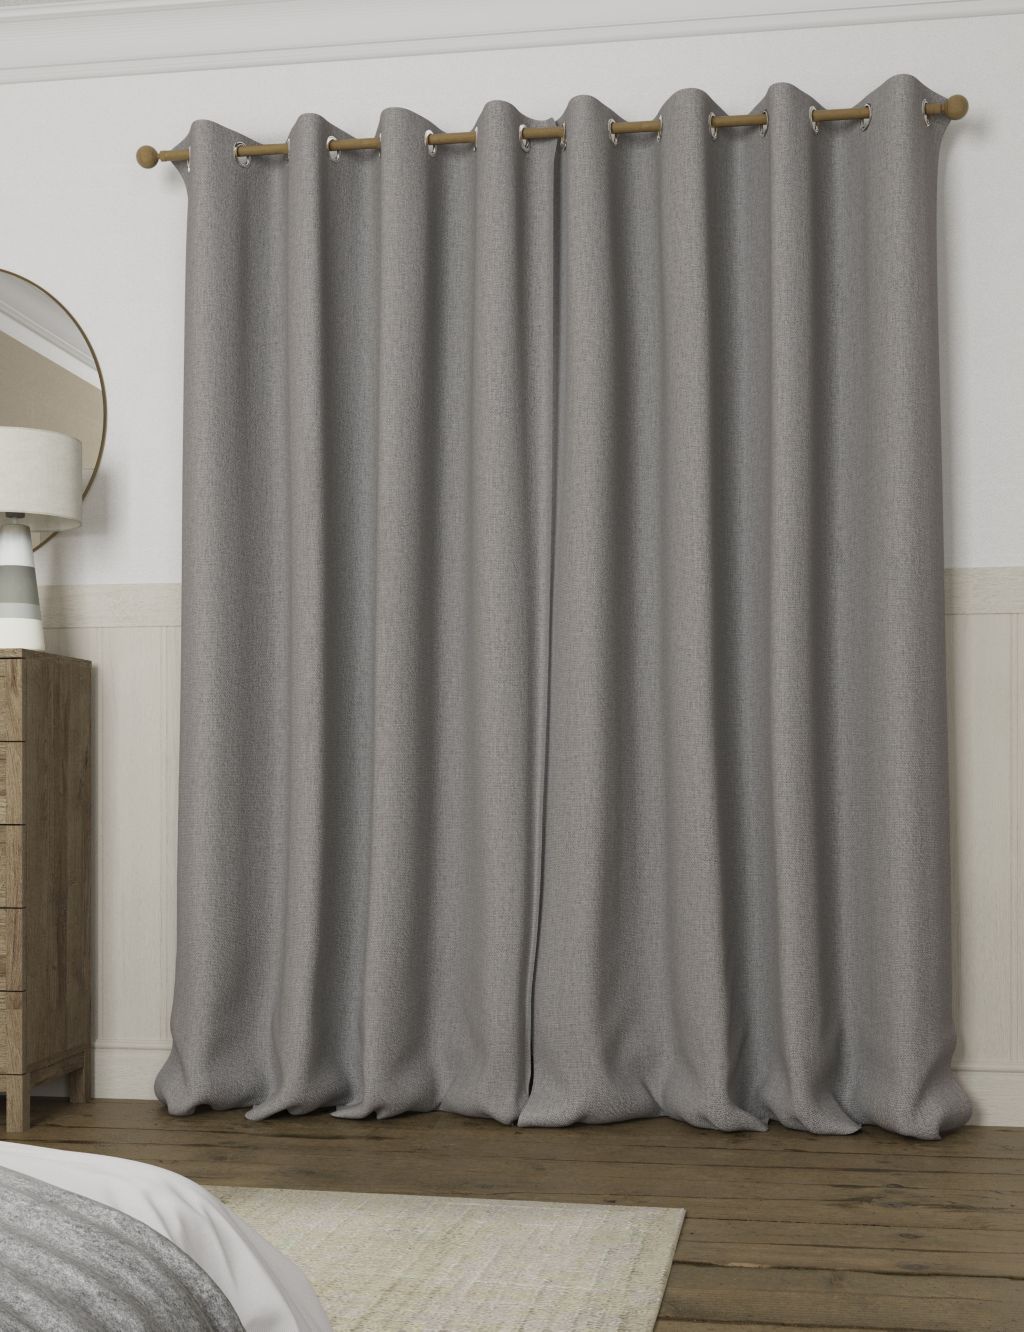 Anti Allergy Eyelet Blackout Temperature Smart Curtains image 3